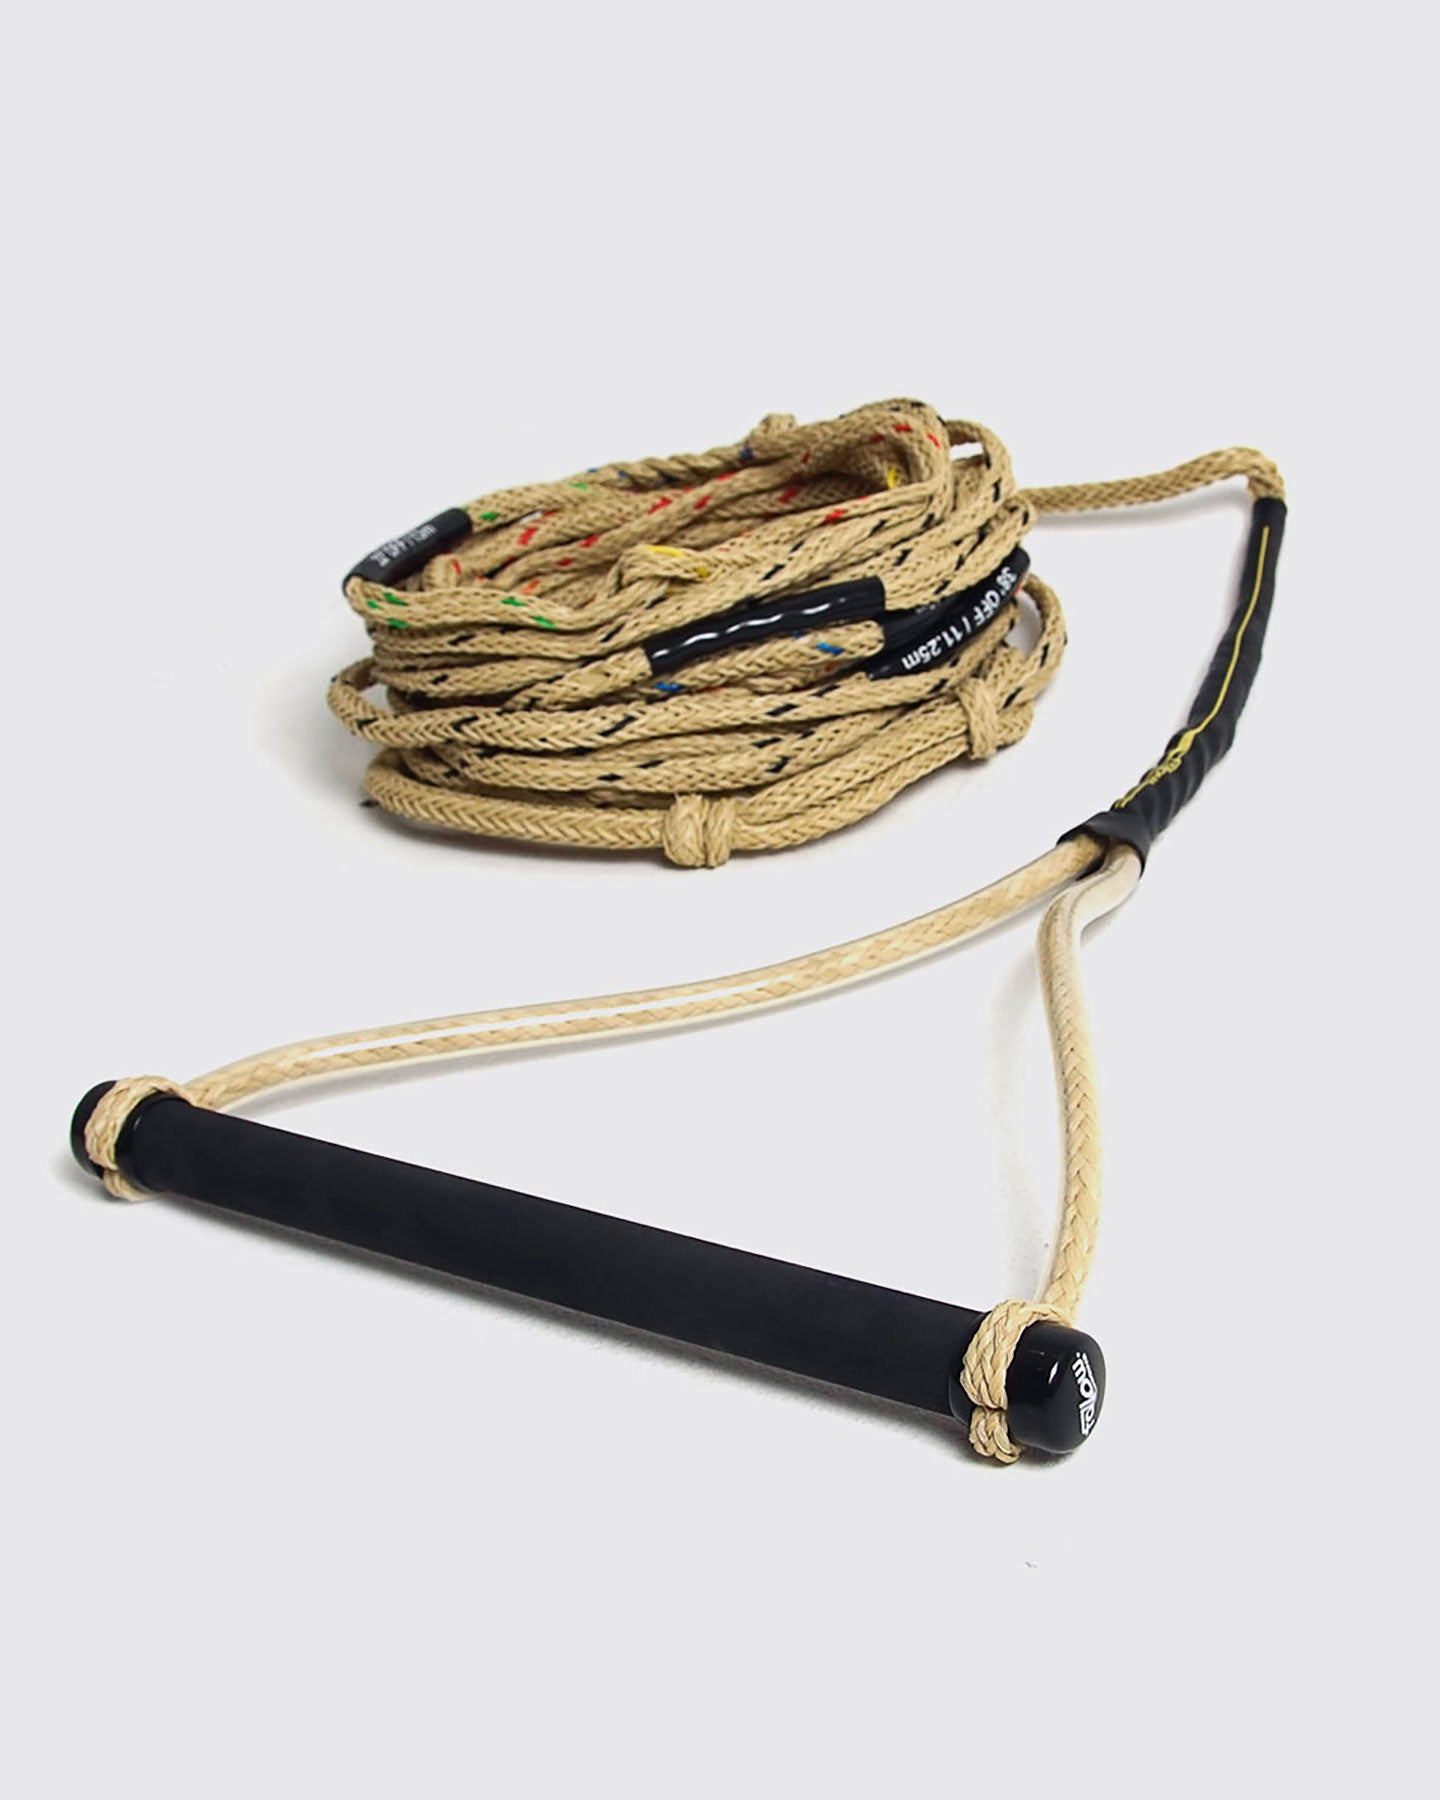 Follow ORIGIN(S) PRO 13" ROPE & HANDLE PACKAGE – GOLD